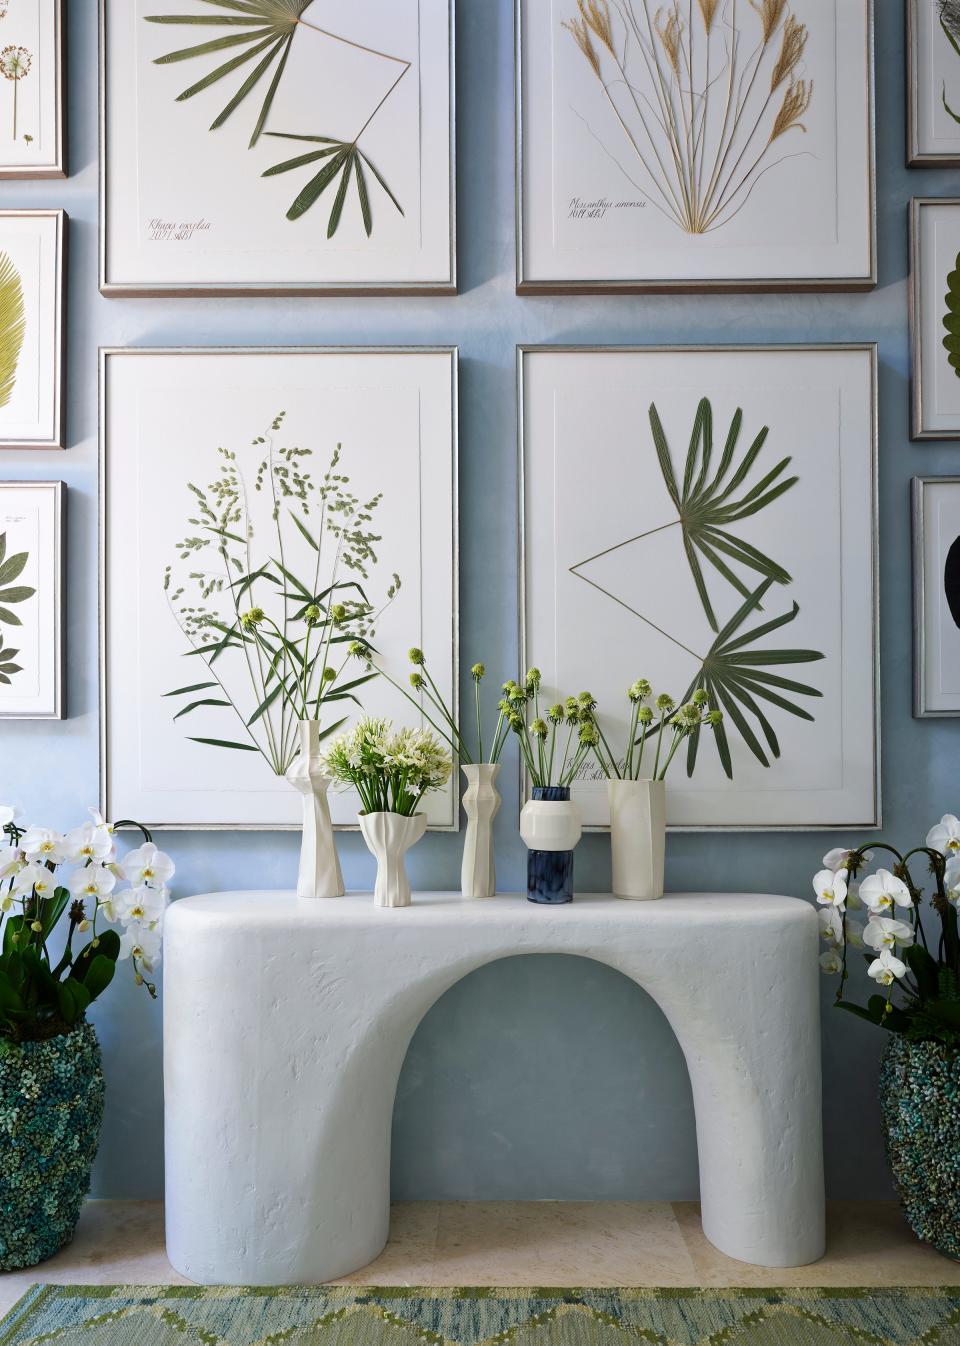 Framed botanicals hang above a freeform console table in the stair hall designed by Charlie Collins of MELROSE for the Kips Bay Decorator Show House Palm Beach.